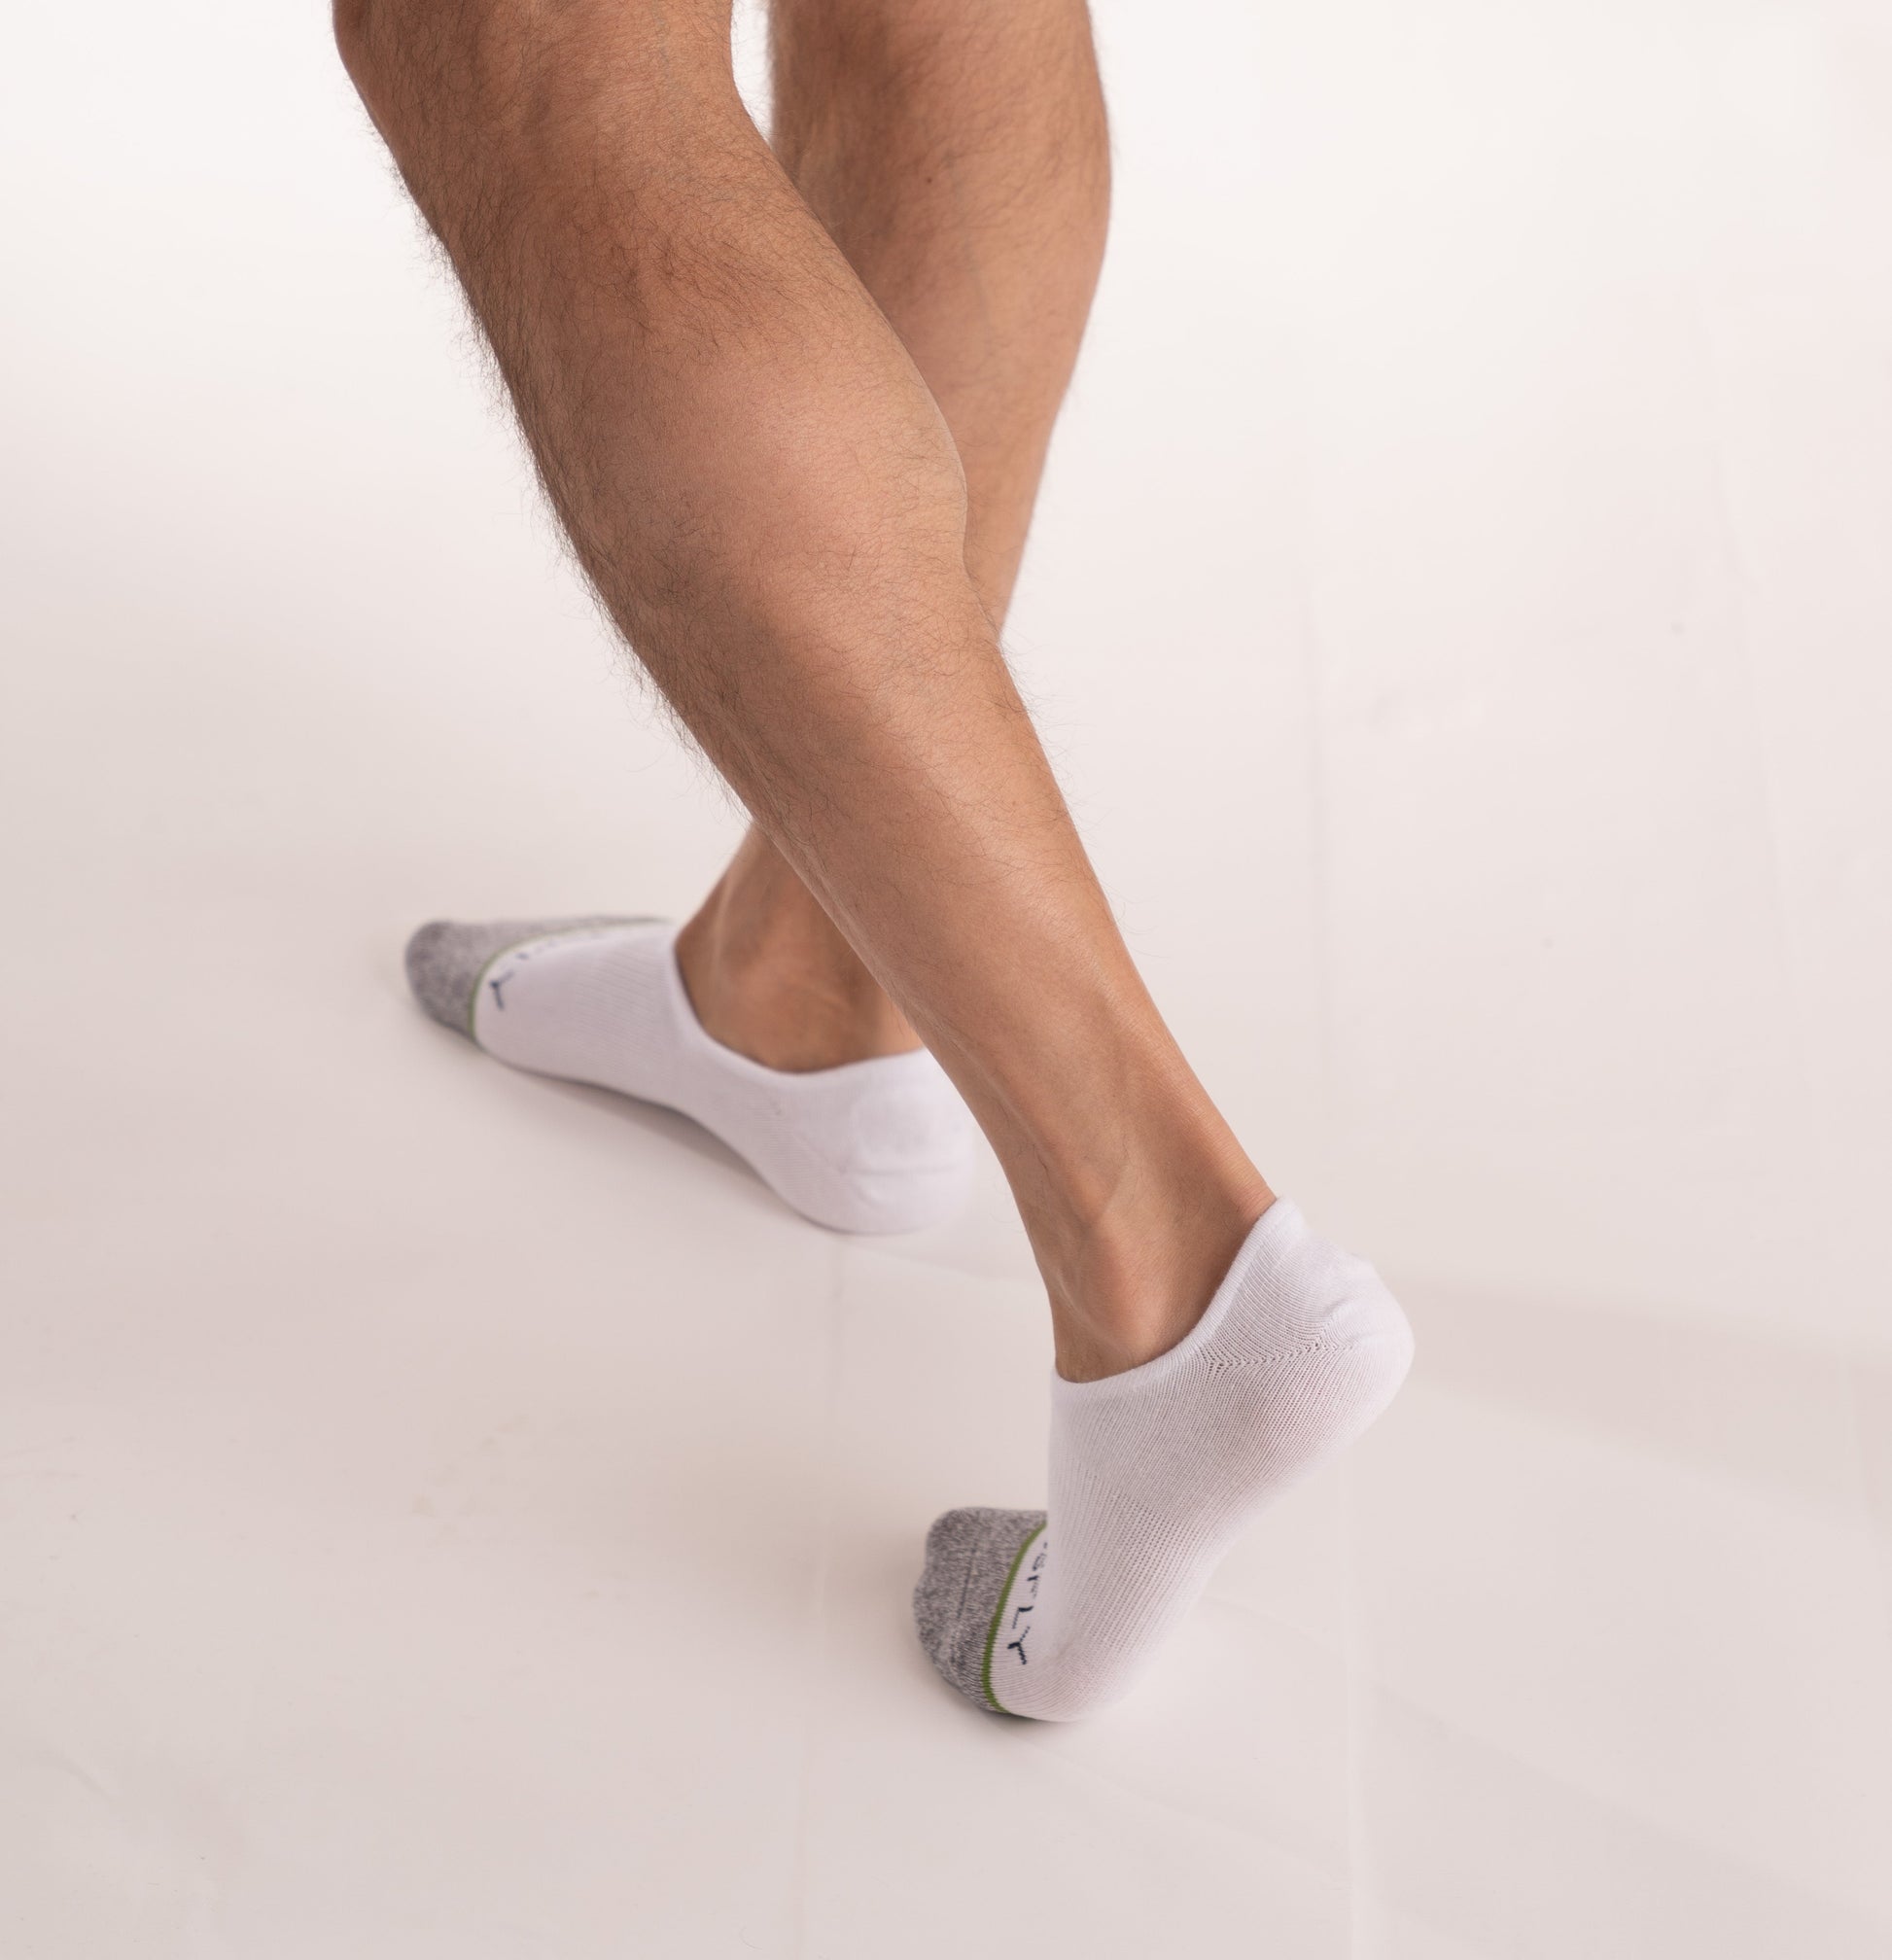 Crossfly men's Original No Show Socks in white from the Everyday series, featuring Flat Toe Seams and 360 Hold.